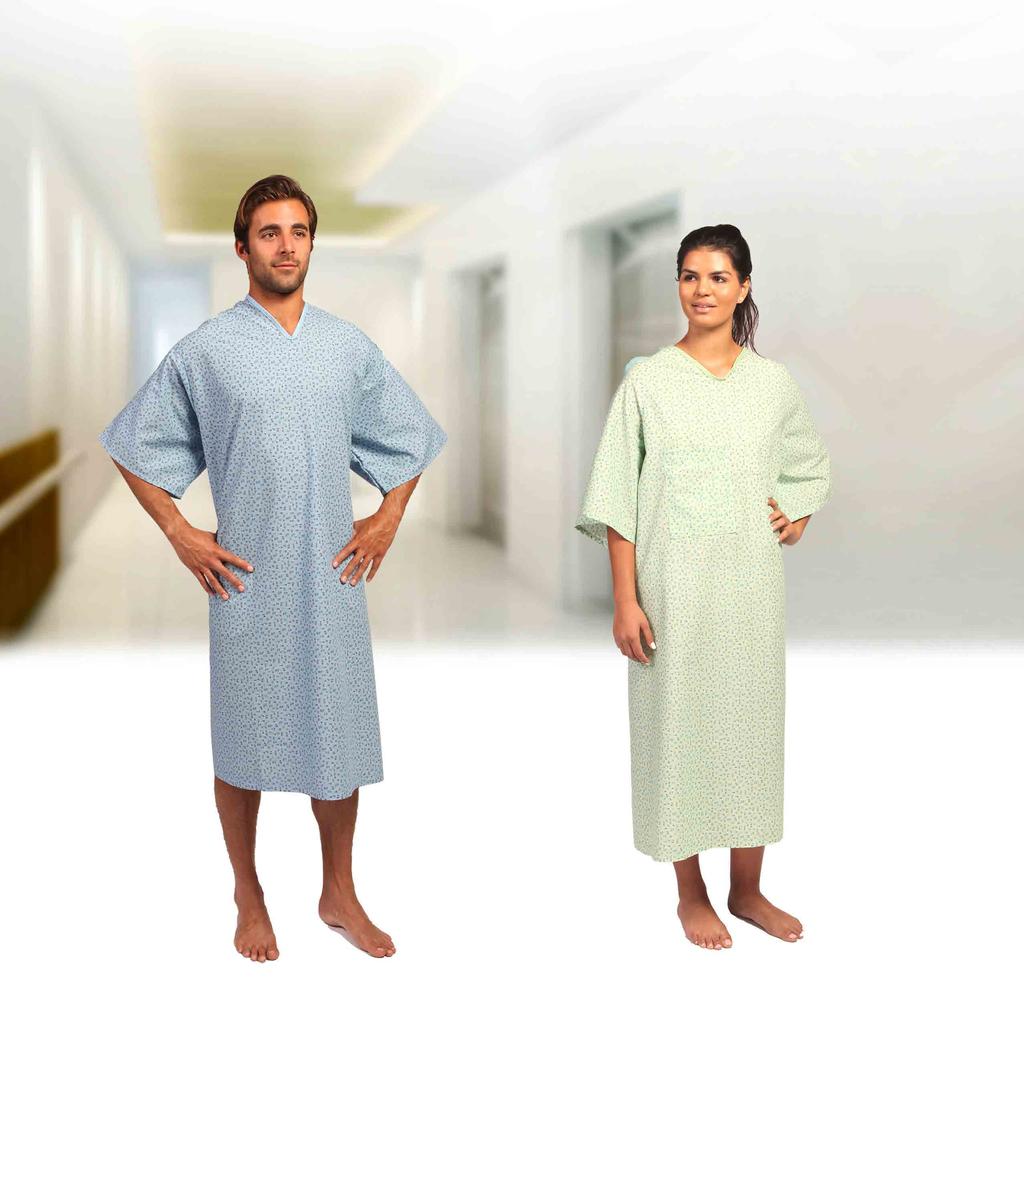 HEALTHCARE DuraPlus Patient Gown 100% Polyester Available in urban blocks blue Angle back, tie side closure Available in size large